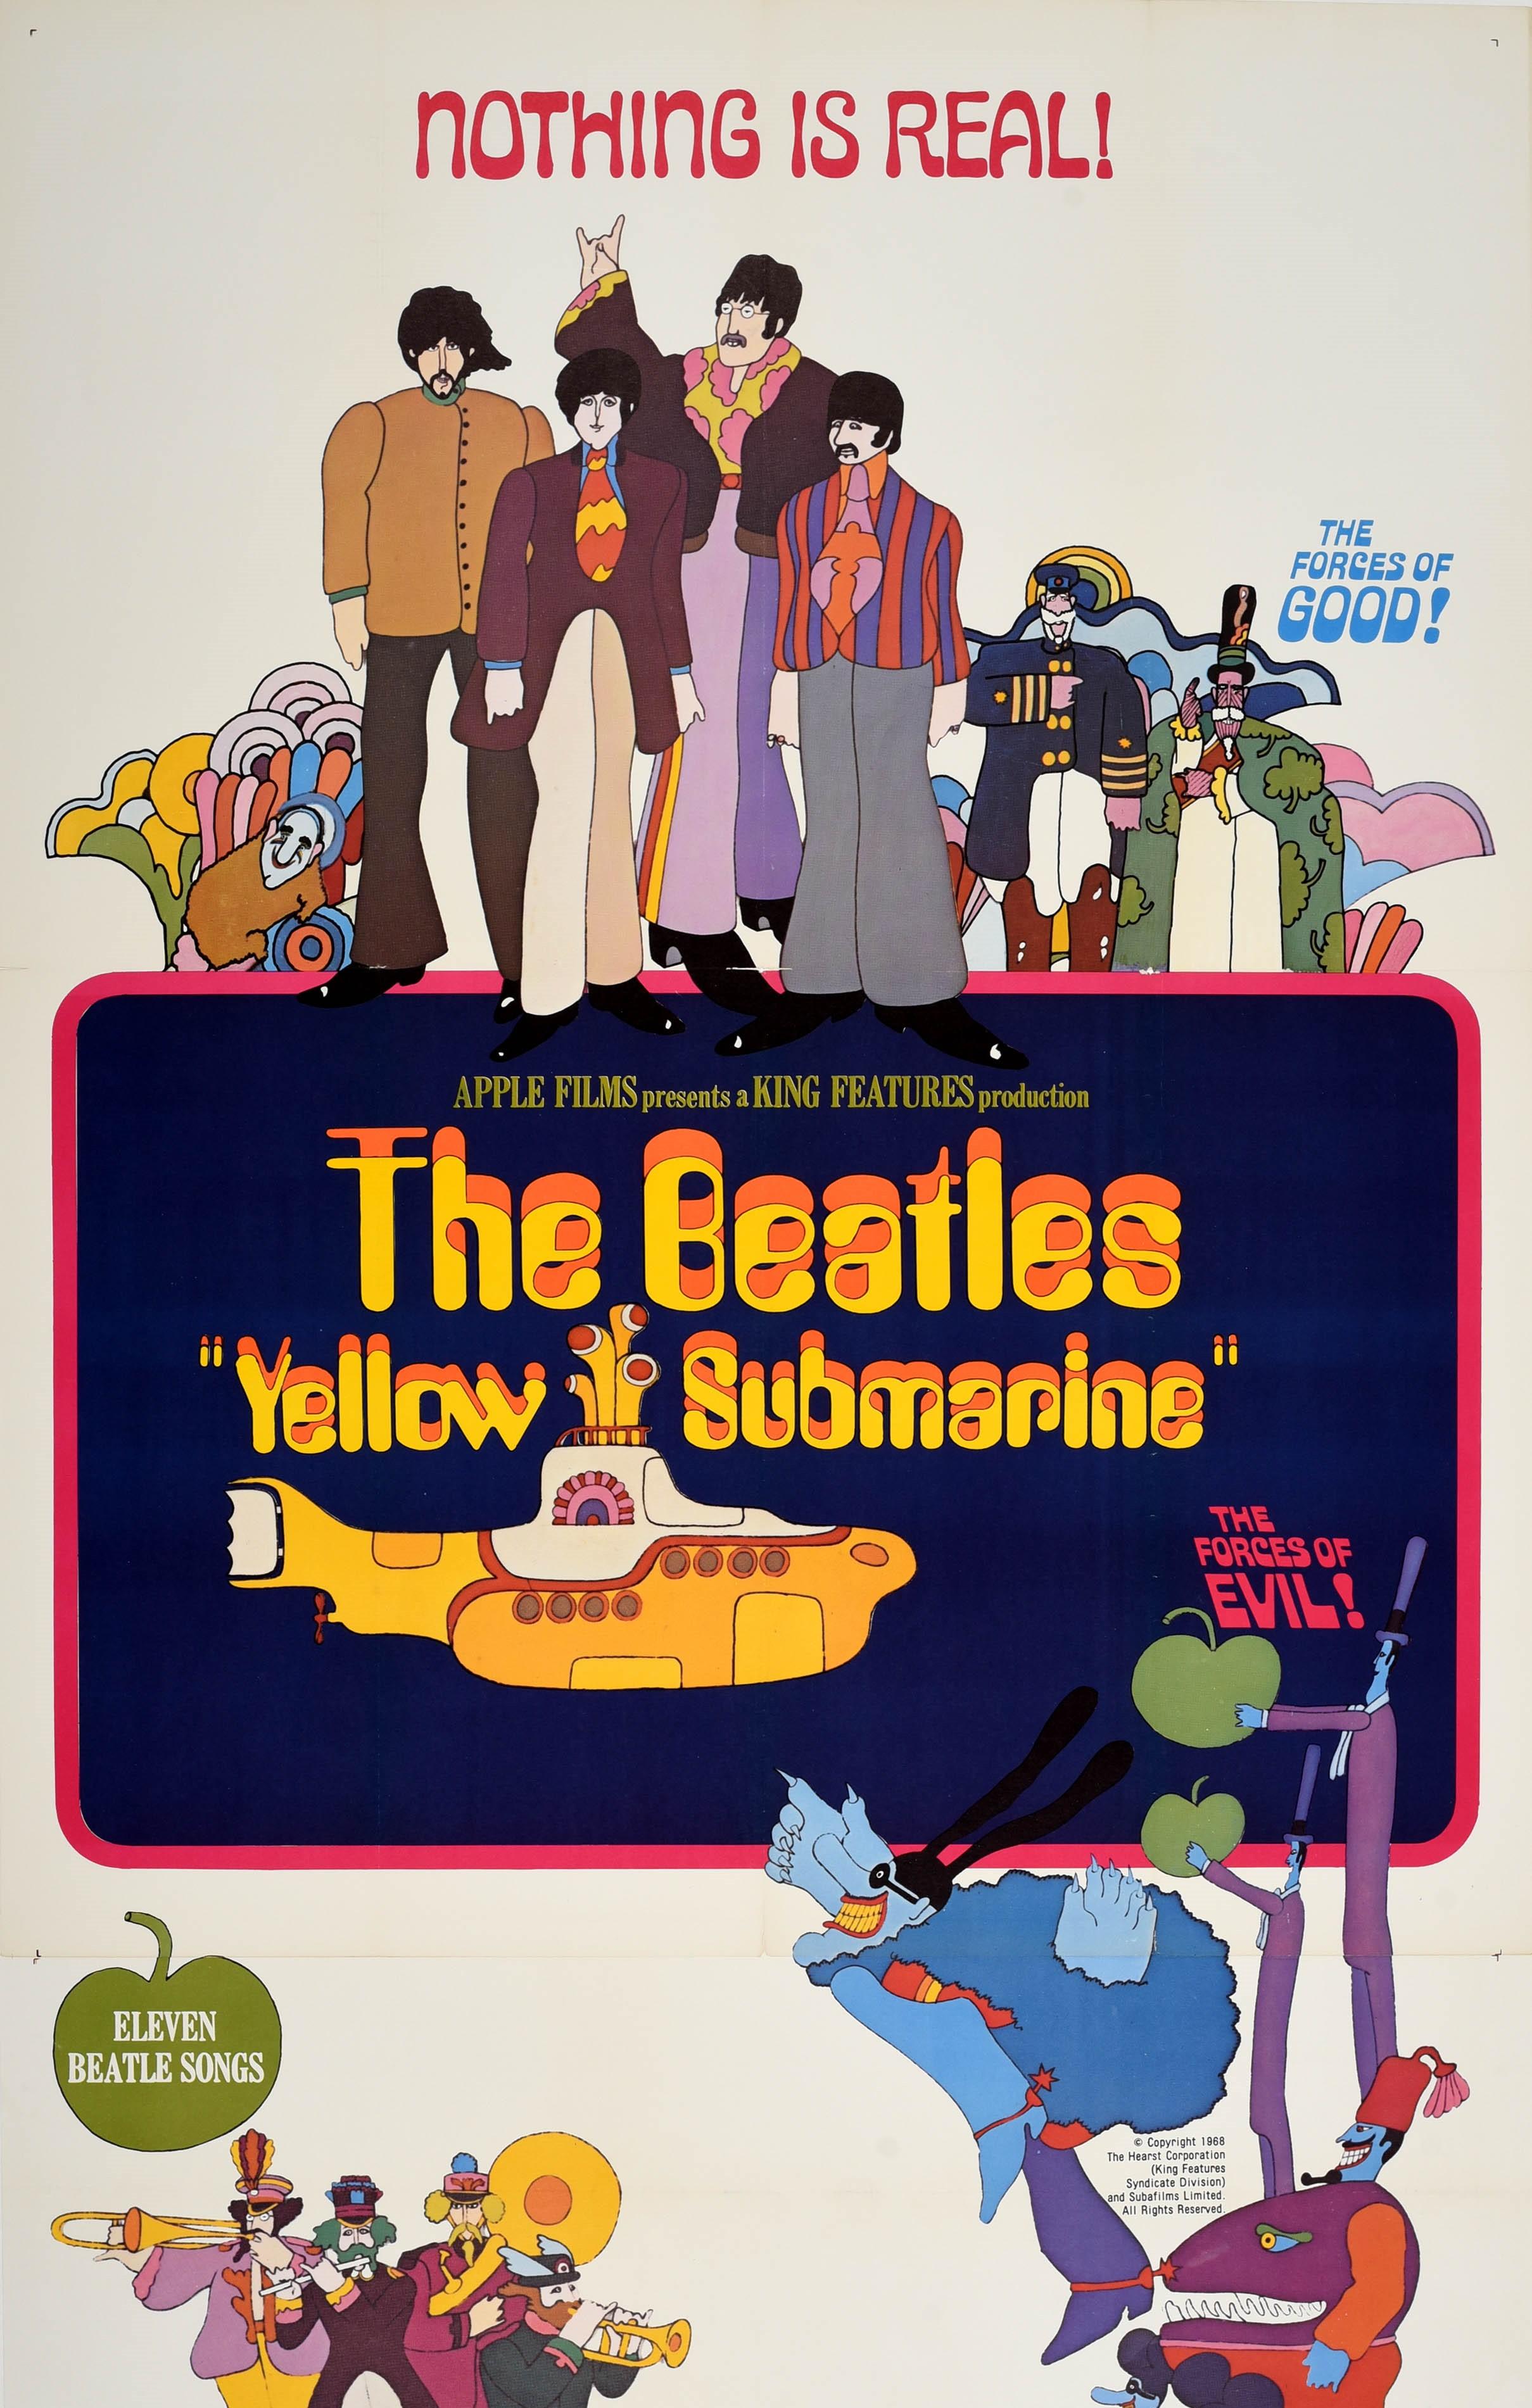 Original vintage movie poster for the 1968 animated musical film Yellow Submarine starring the Sgt. Pepper's Lonely Hearts Club Band based on a song by John Lennon and Paul McCartney depicting an image of the iconic yellow submarine with psychedelic